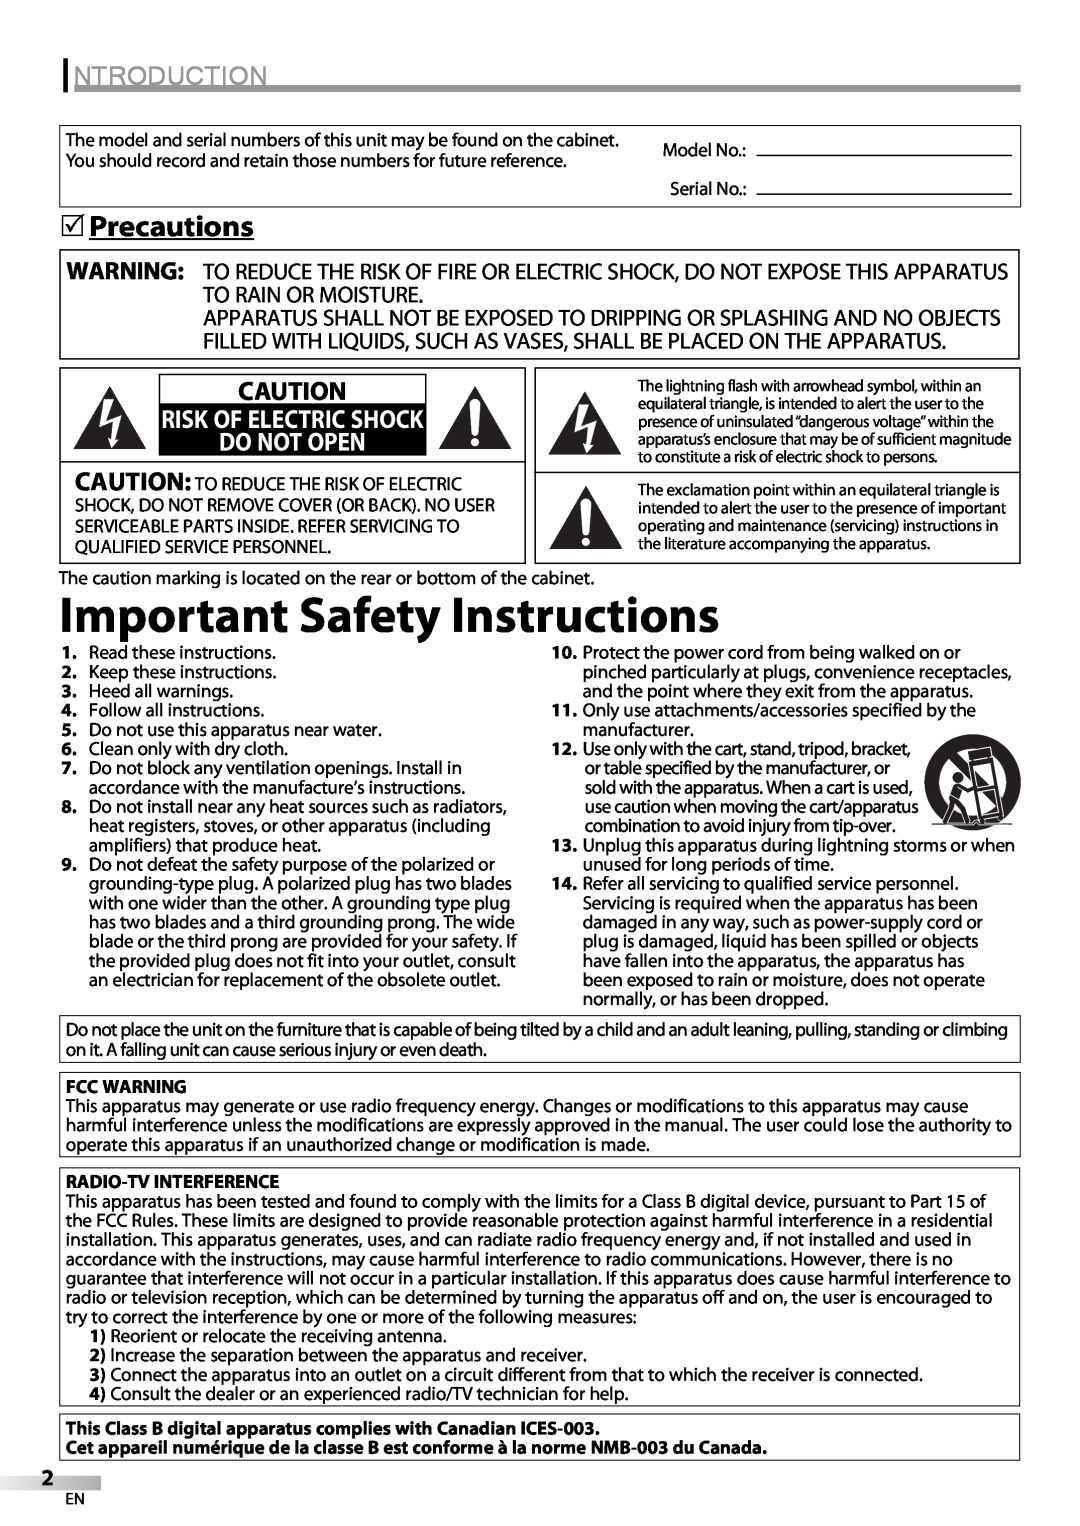 Sylvania LC370SS9 Important Safety Instructions, Introduction, Precautions, Do Not Open, Risk Of Electric Shock 